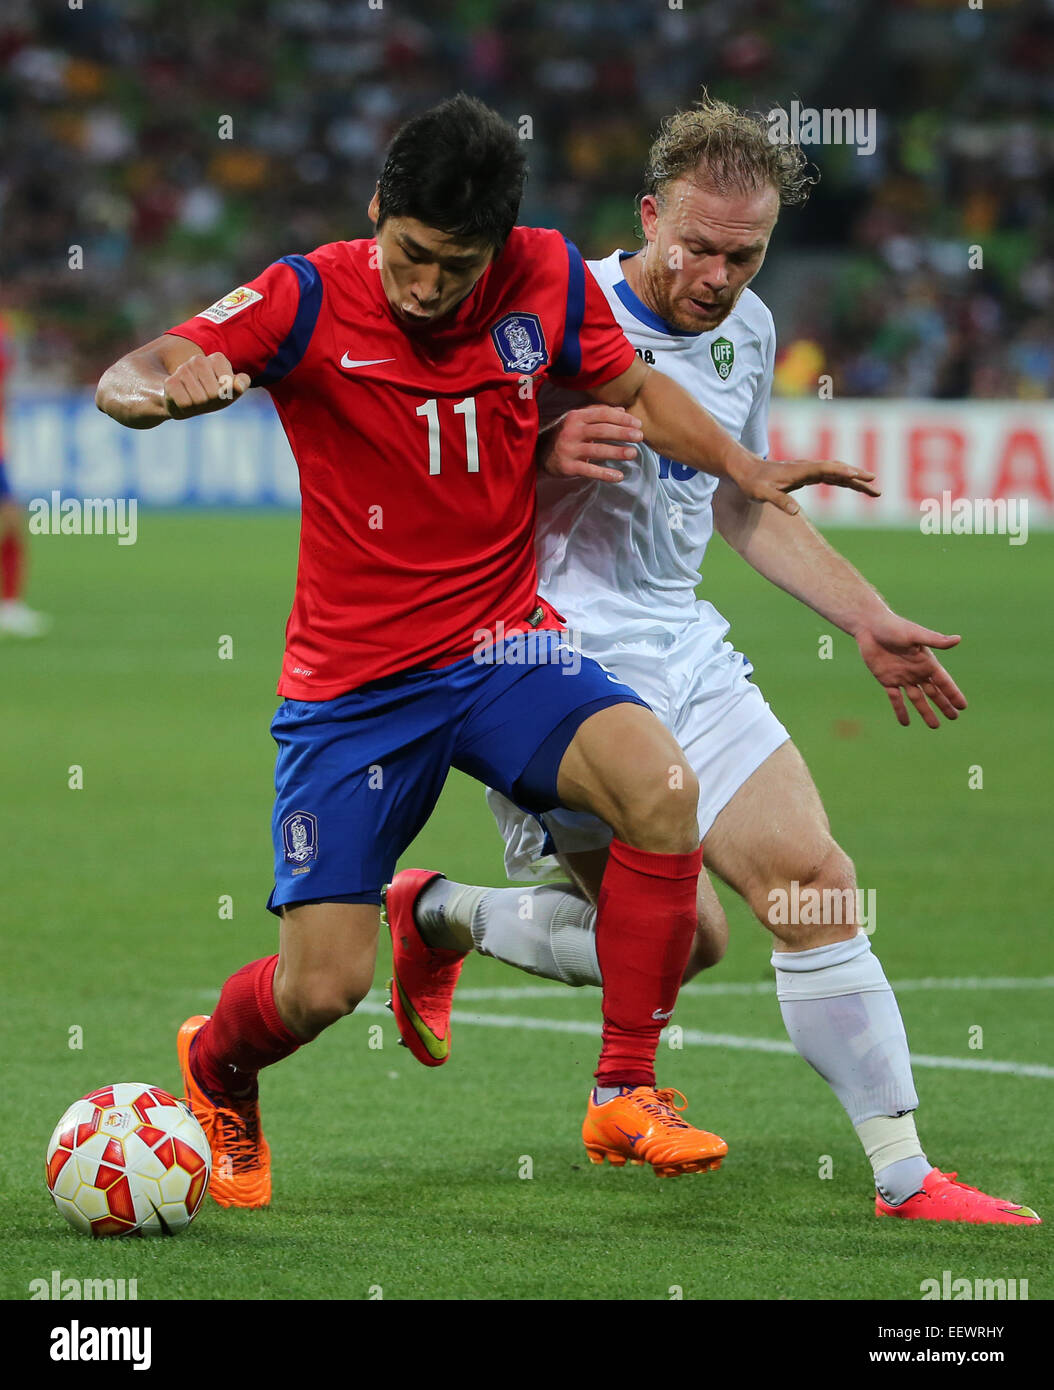 Melbourne, Australia. 22nd January, 2015. South Korea's Lee Keun Ho (L) fights for the ball during the quarterfinal match against Uzbekistan at the 2015 AFC Asian Cup in Melbourne, Australia, Jan. 22, 2015. South Korea won 2-0 in extra time to reach the semifinals at the AFC Asian Cup. Credit:  Xinhua/Alamy Live News Stock Photo